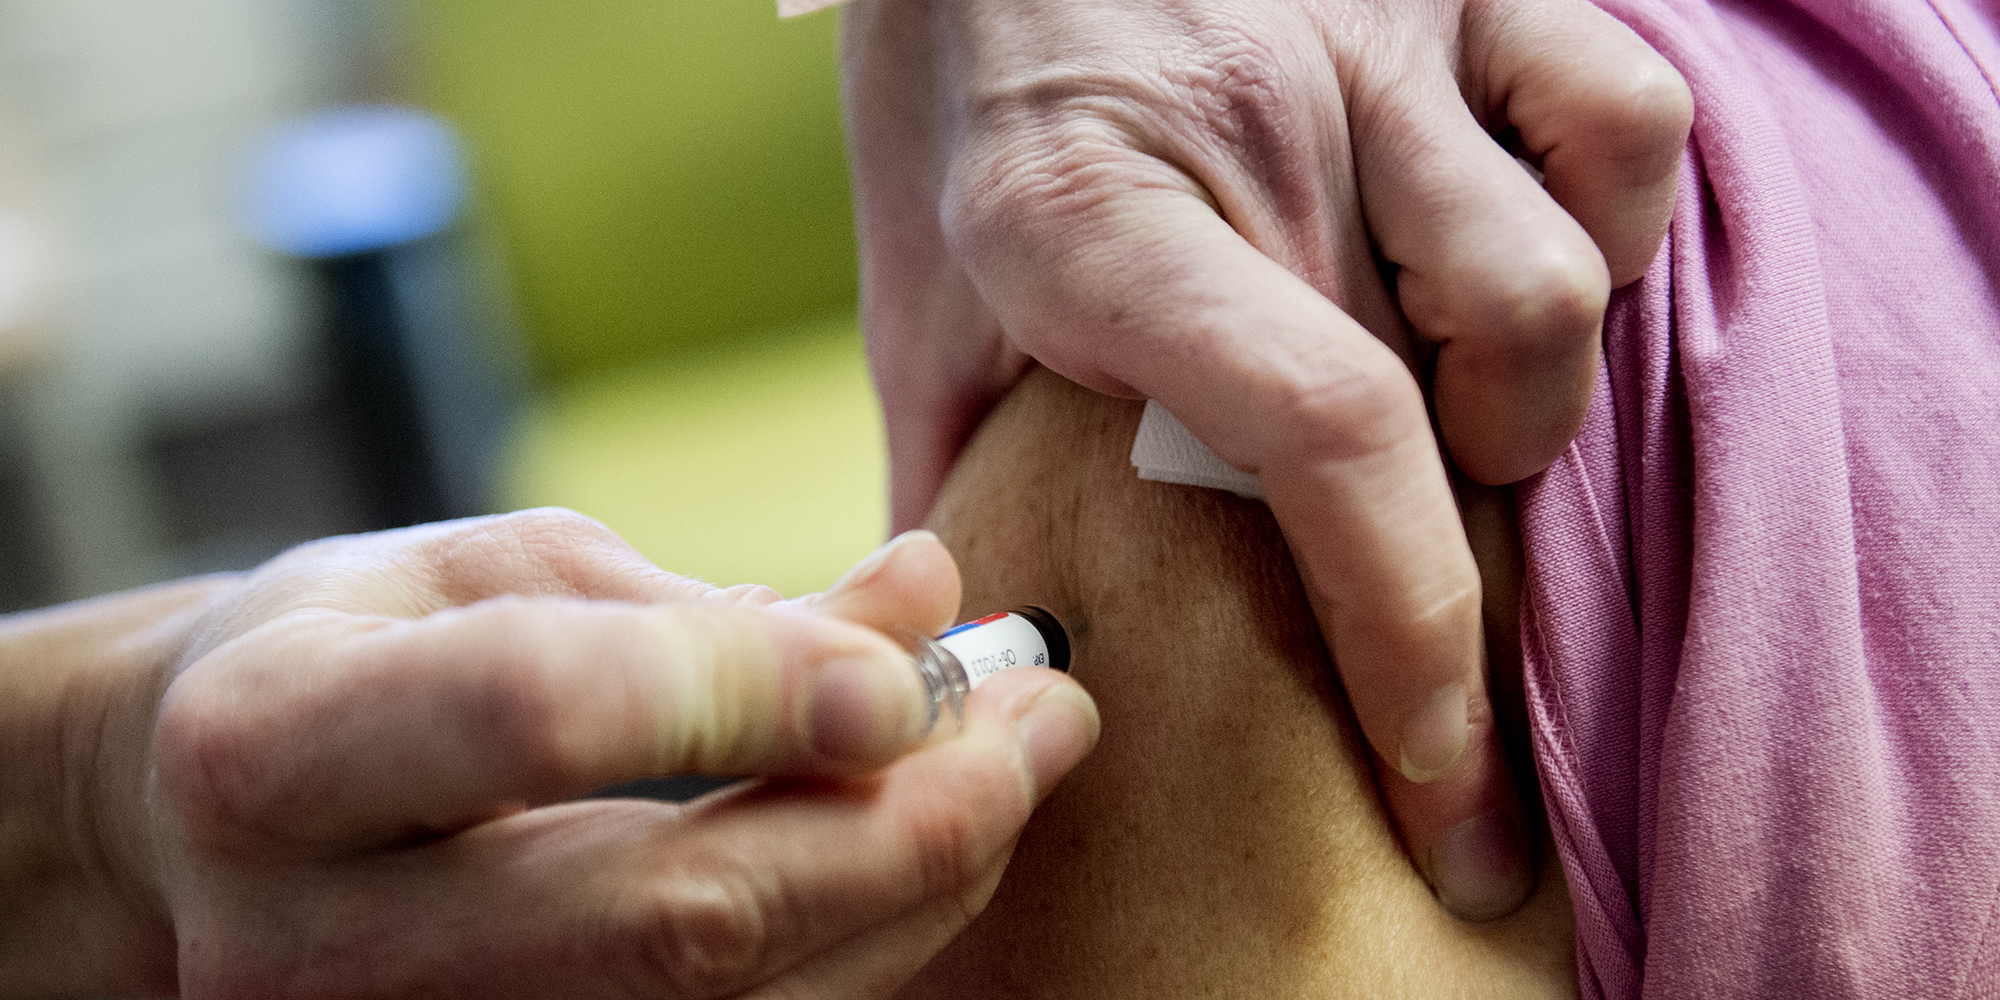 This year's vaccine protects against four different types of flu.